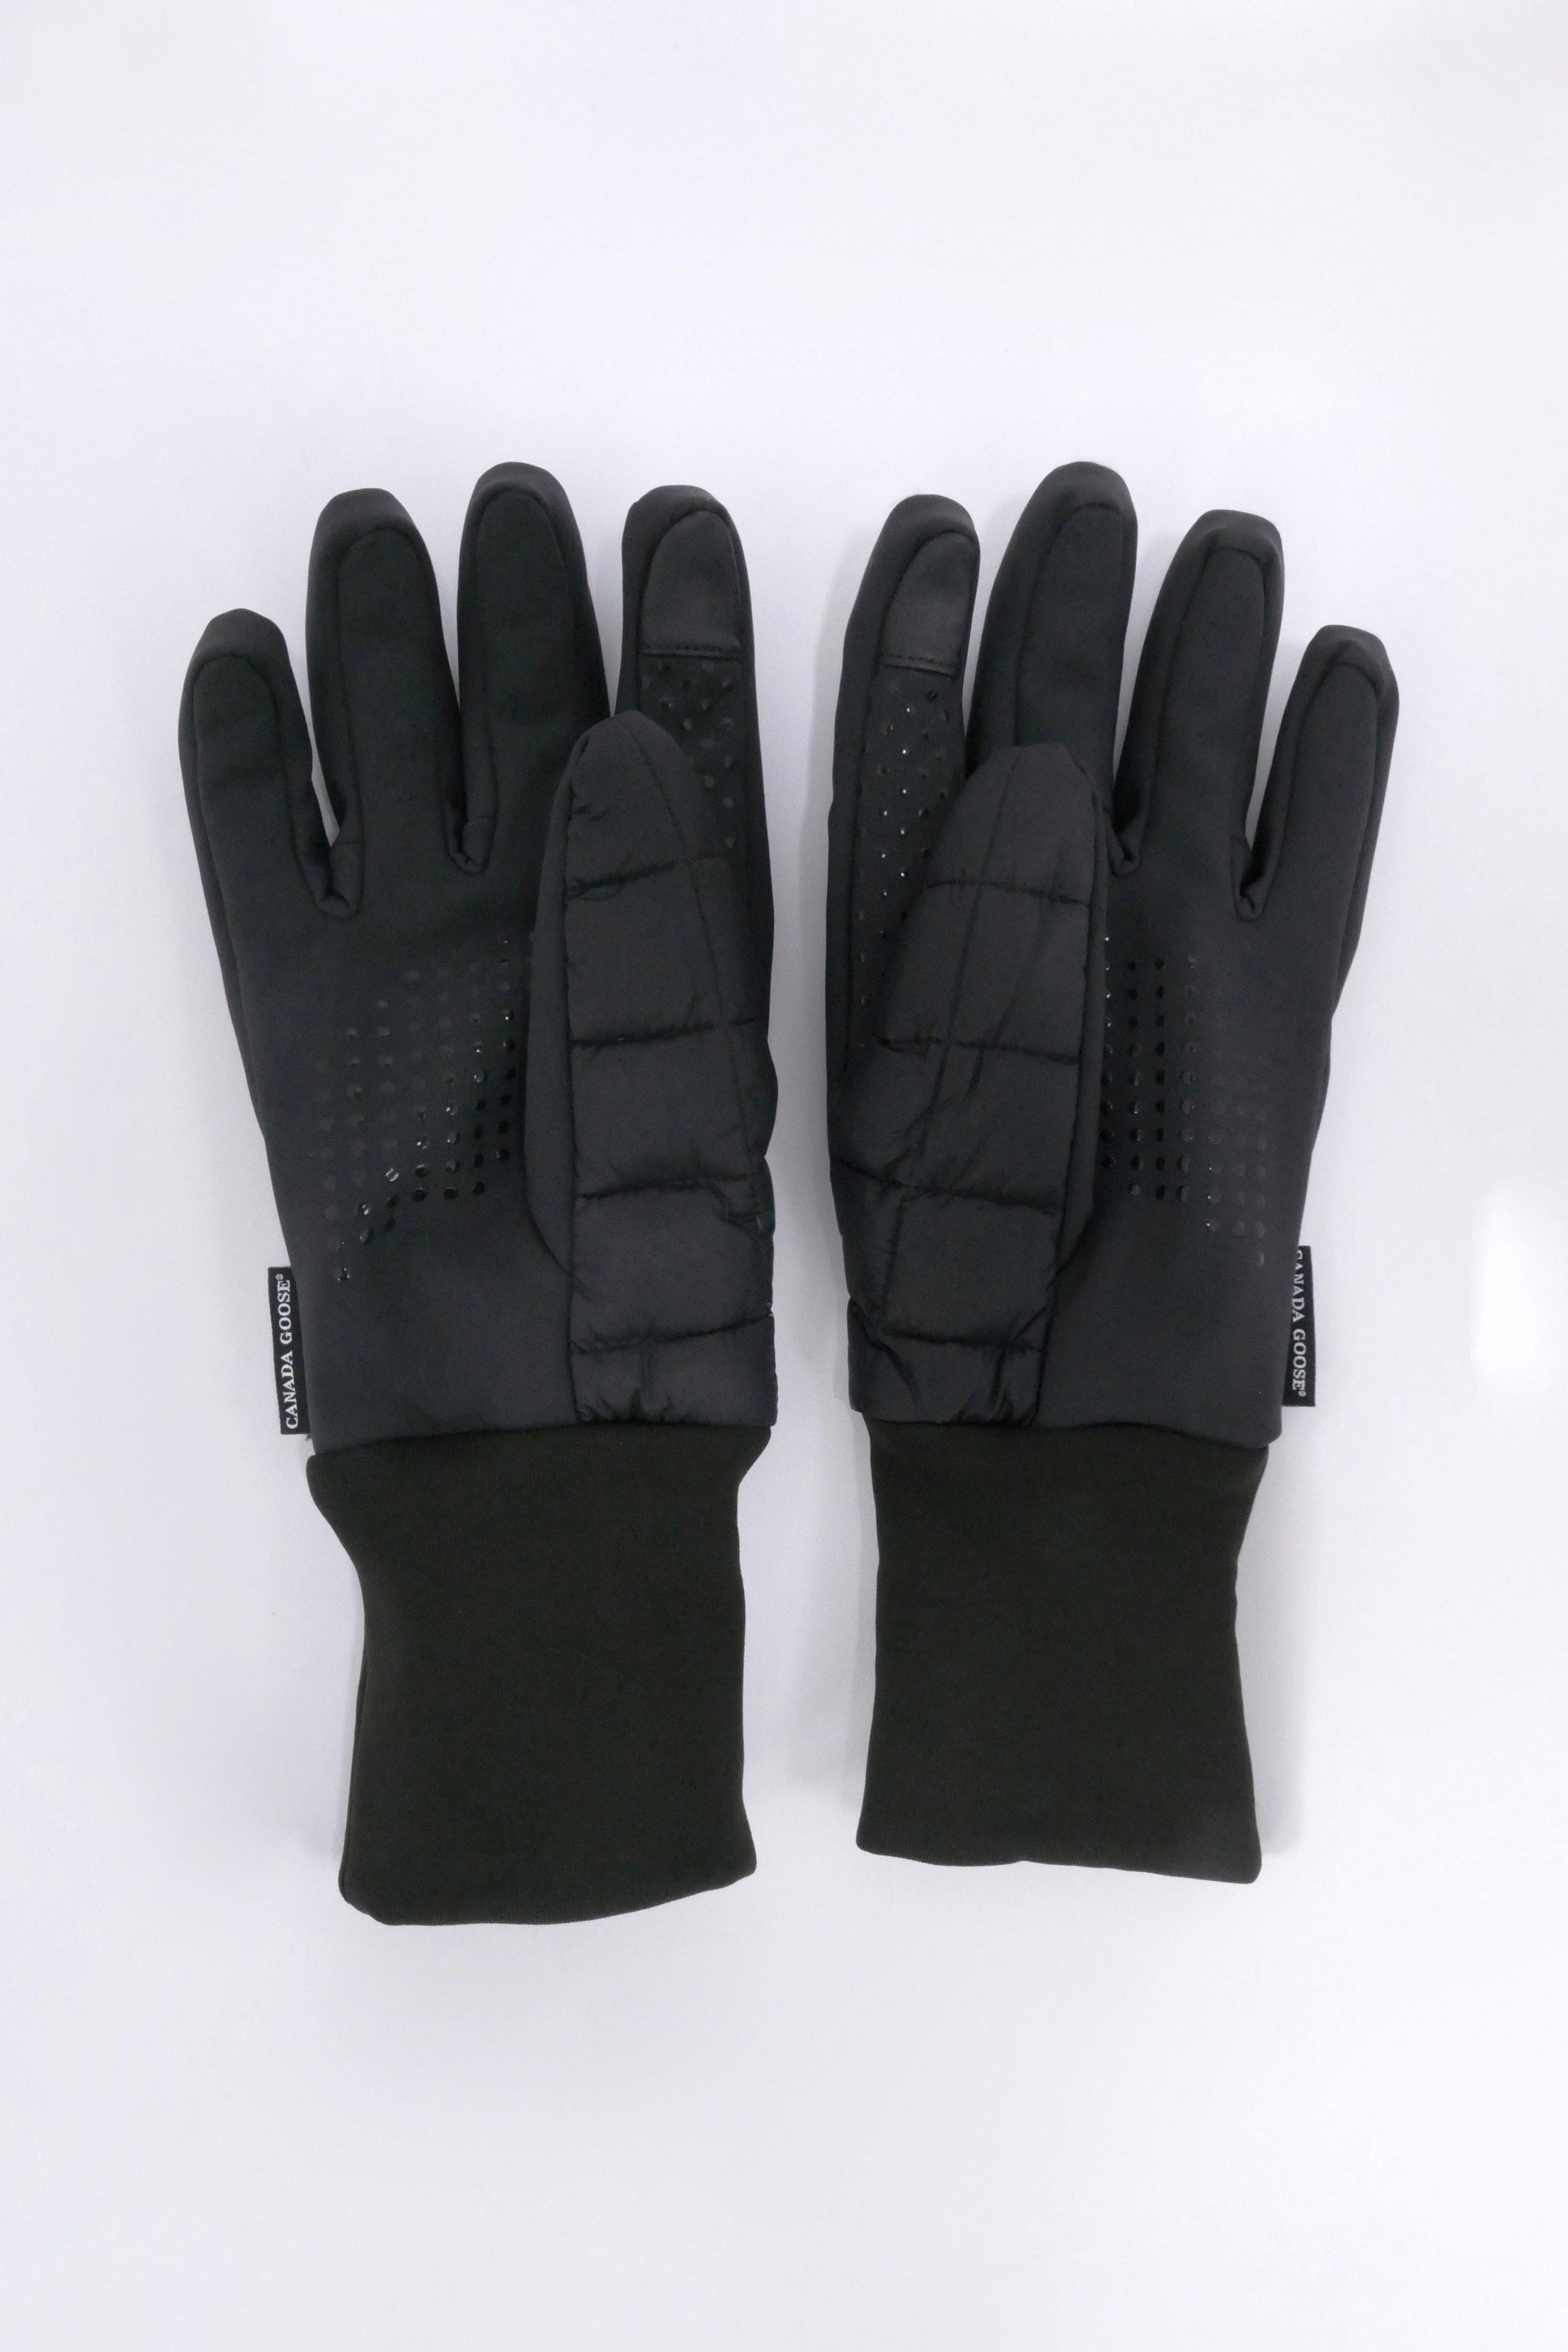 Canada Goose Mens Winter Accessories Gloves & Mitts Northern